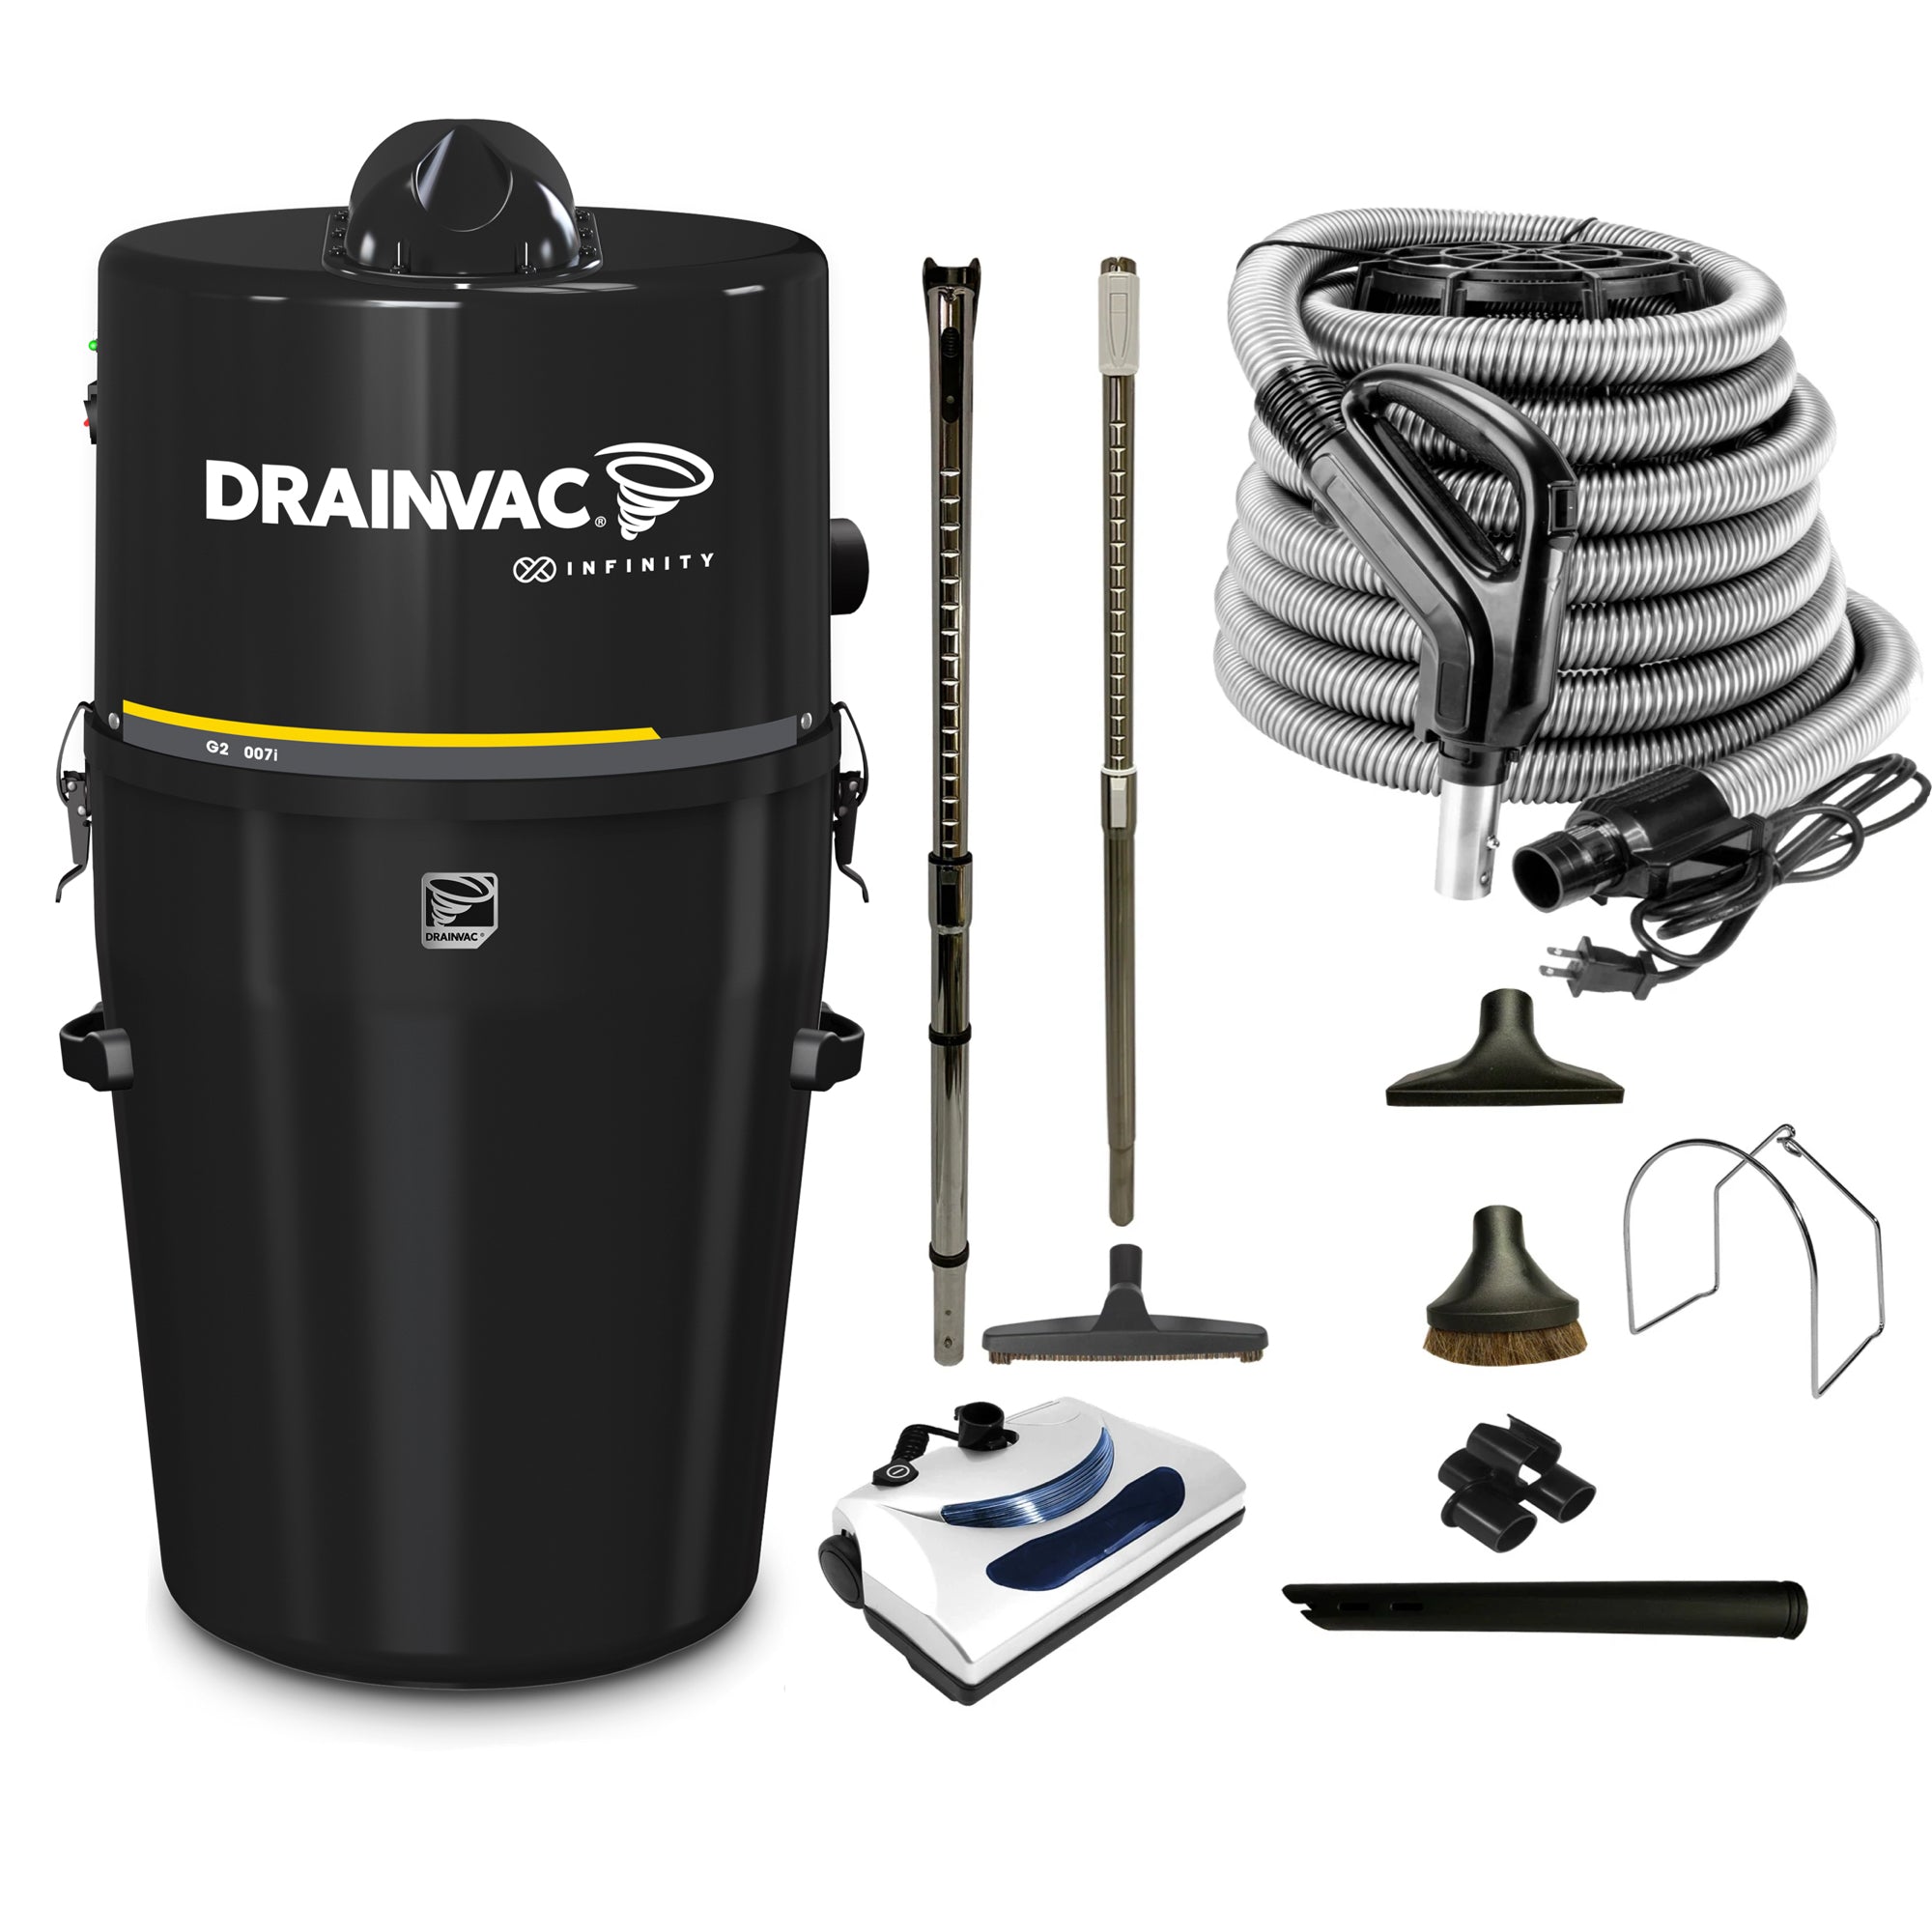 DrainVac G2-007i Central Vacuum with Basic Electric Package